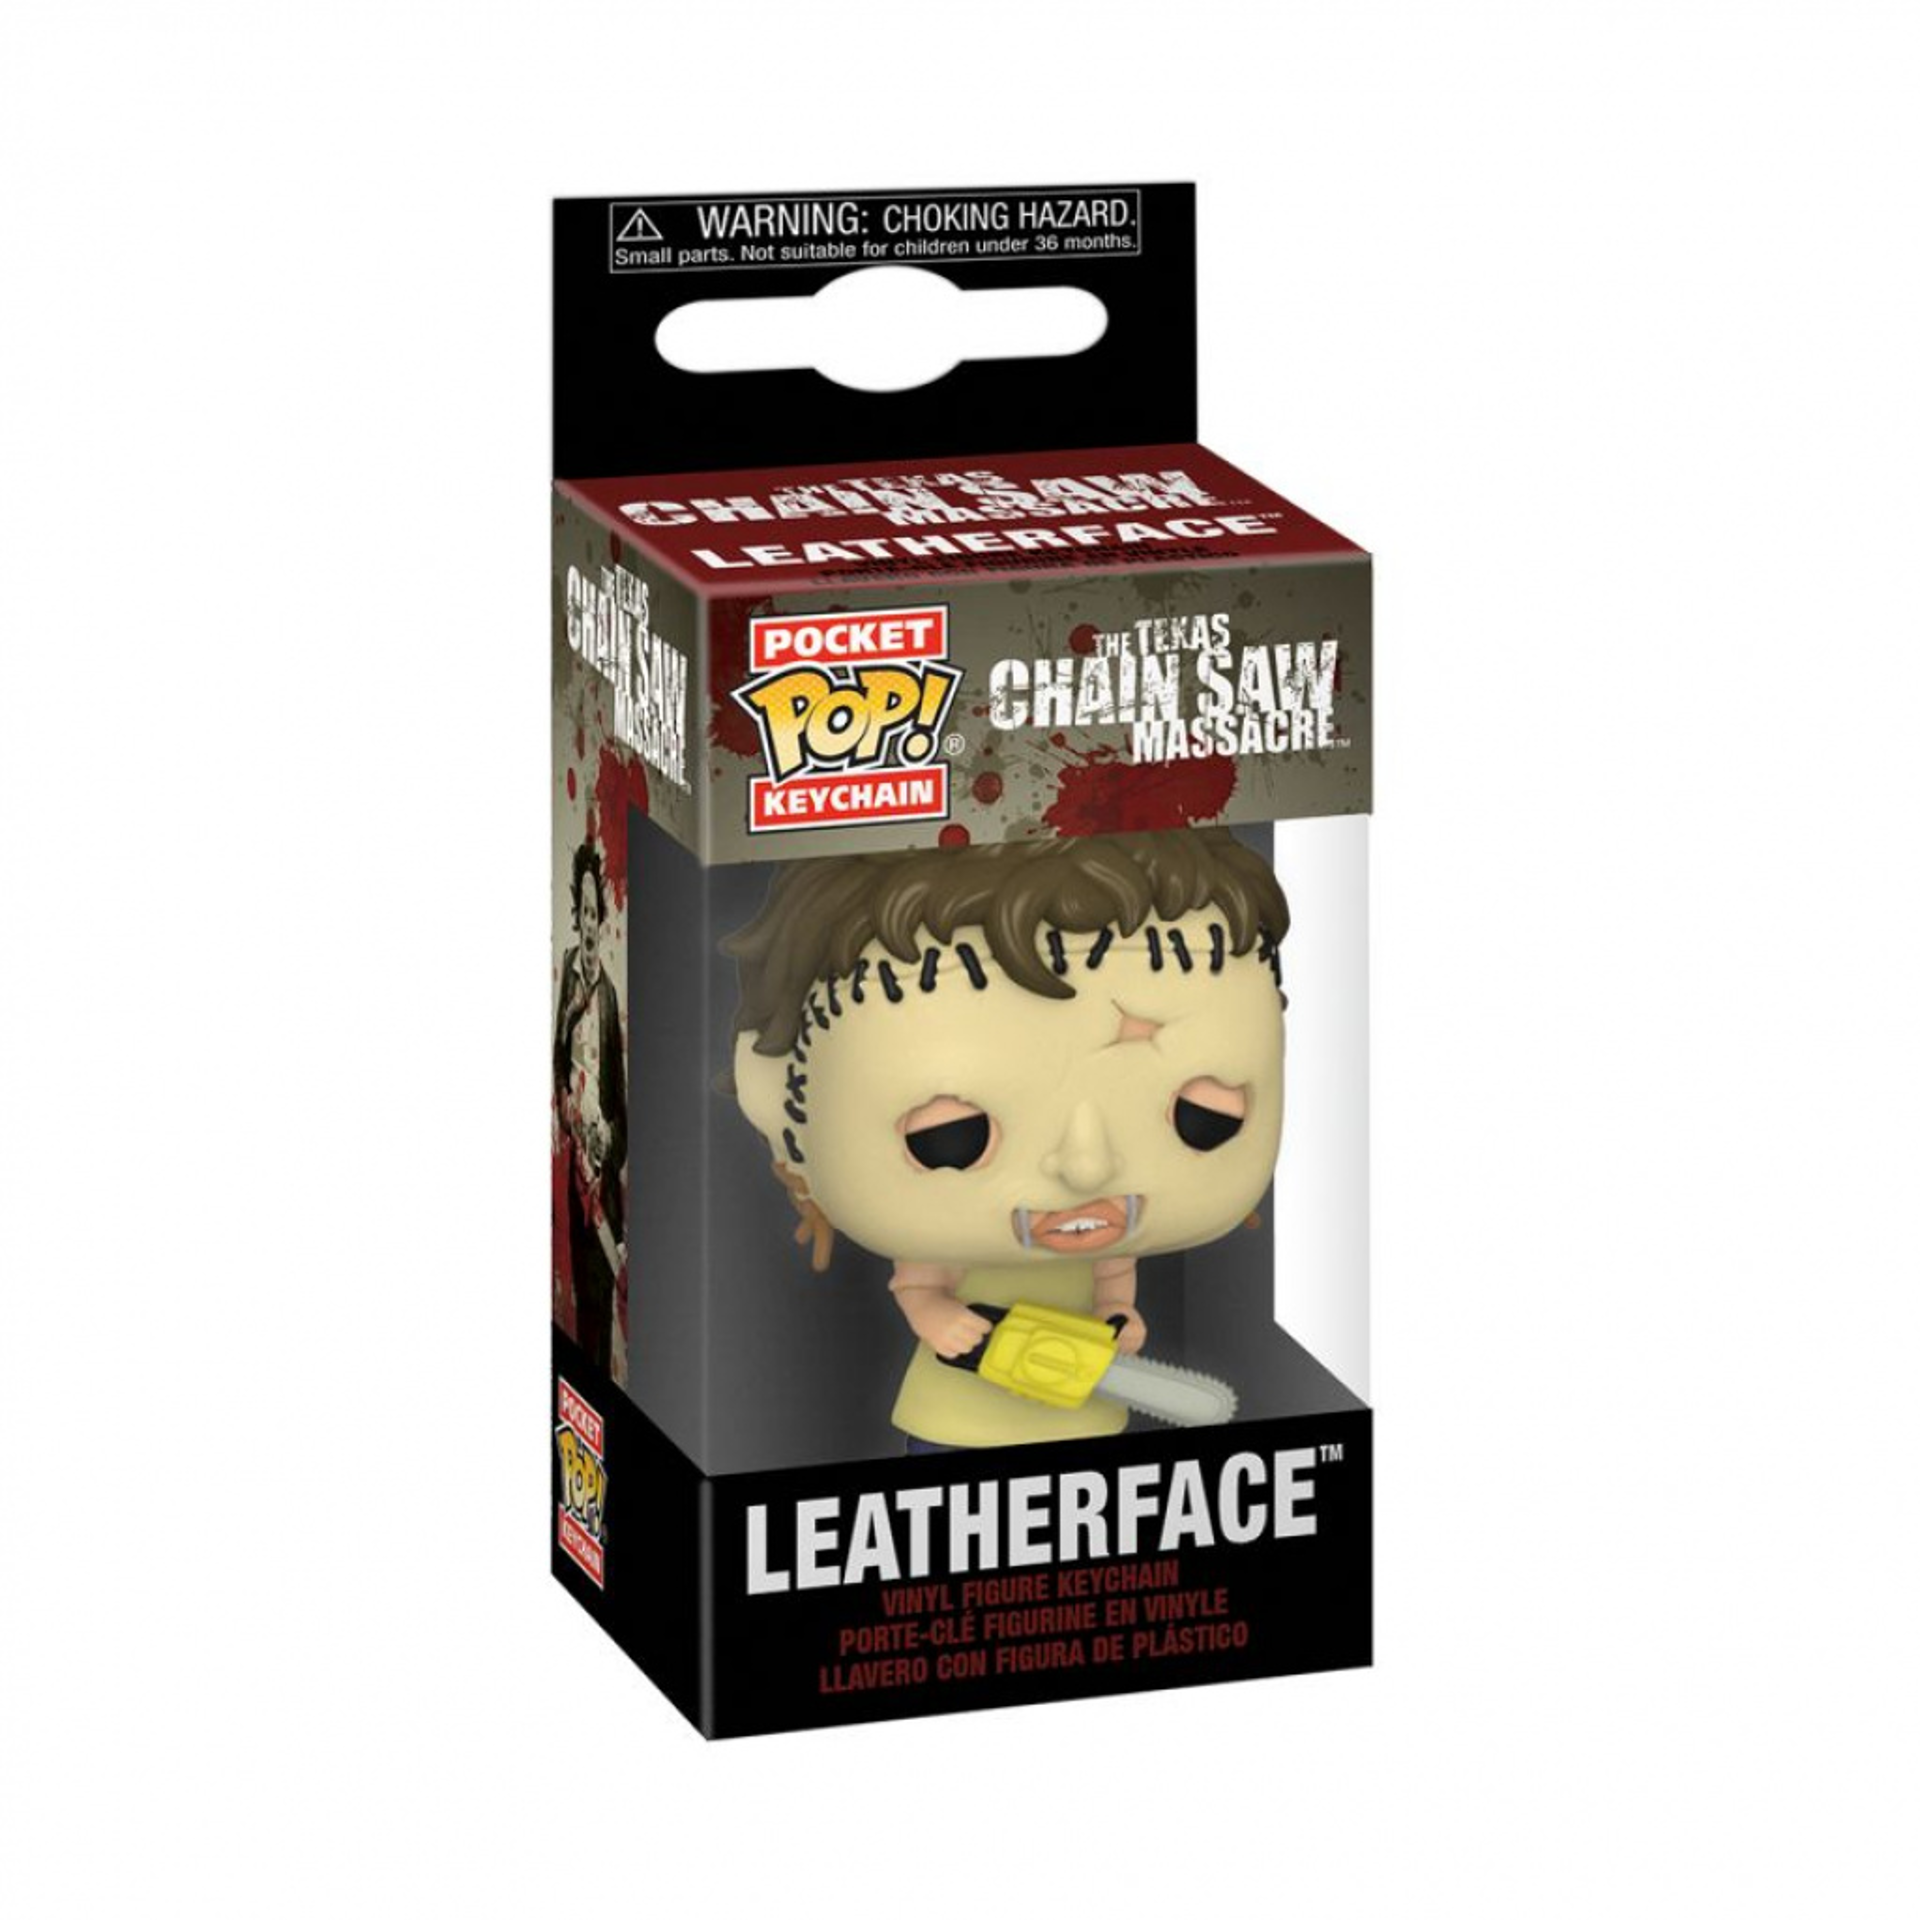 Funko Pocket Pop! Keychain: The Texas Chainsaw Massacre - Leatherface (Classic) ENG Merchandising